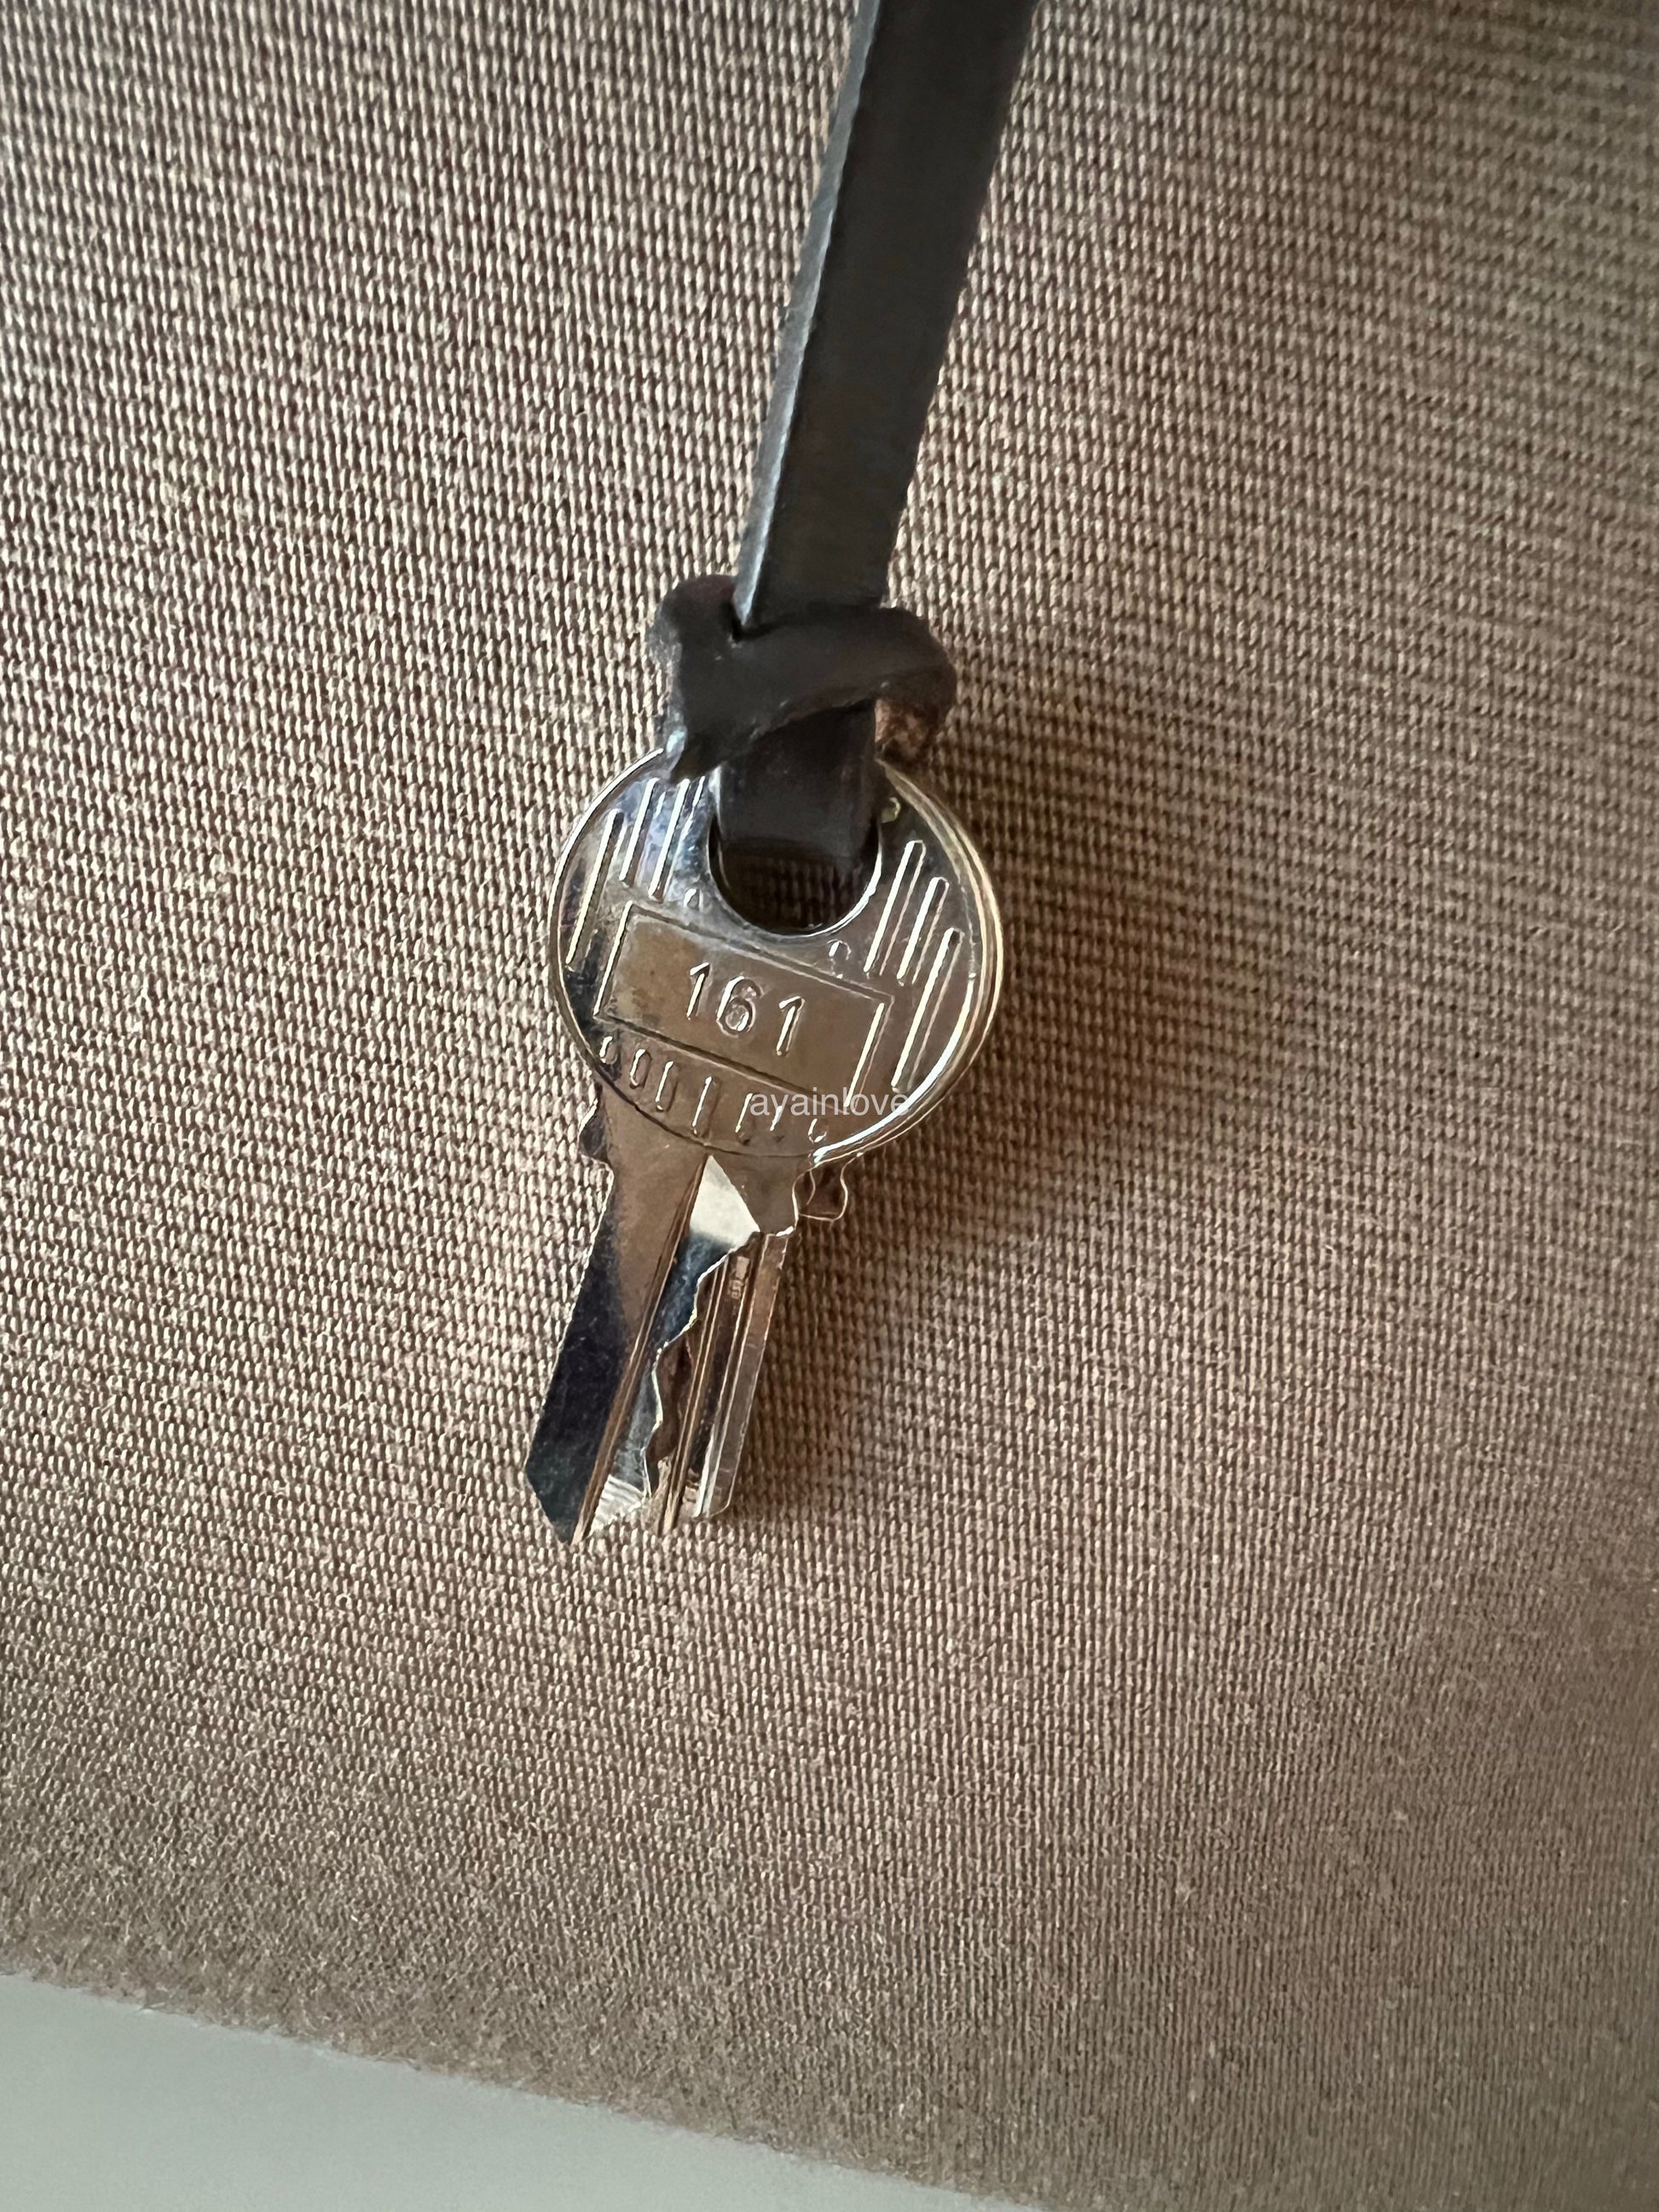 Is there a way I can unlock the lock without a key? : r/Louisvuitton